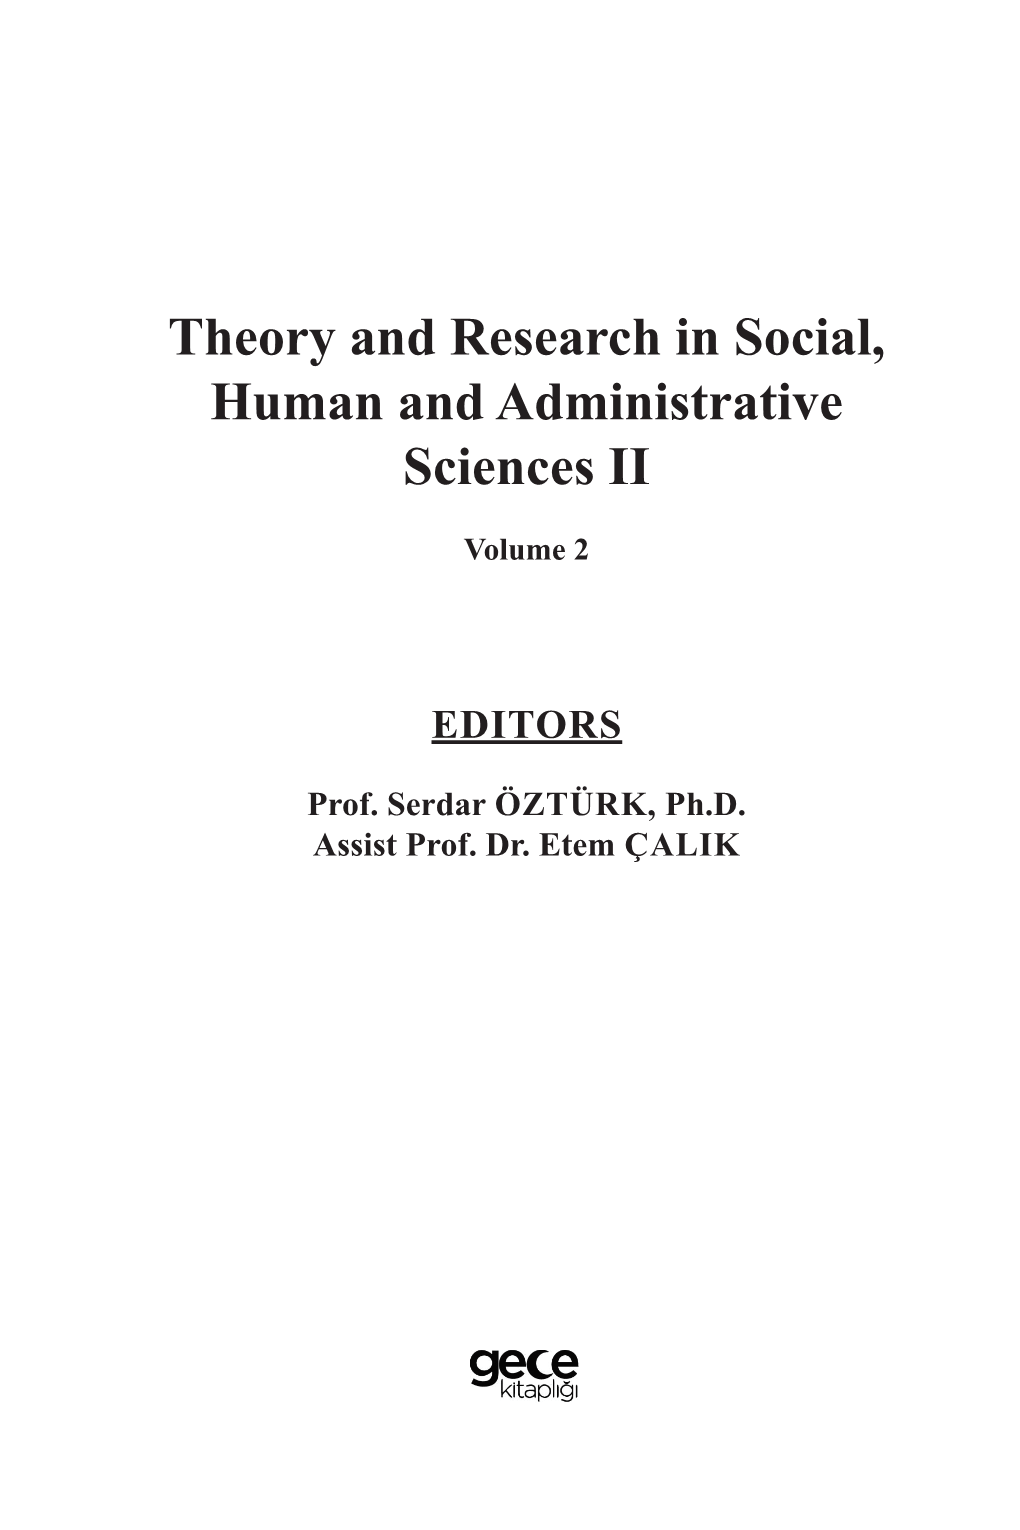 Theory and Research in Social, Human and Administrative Sciences II